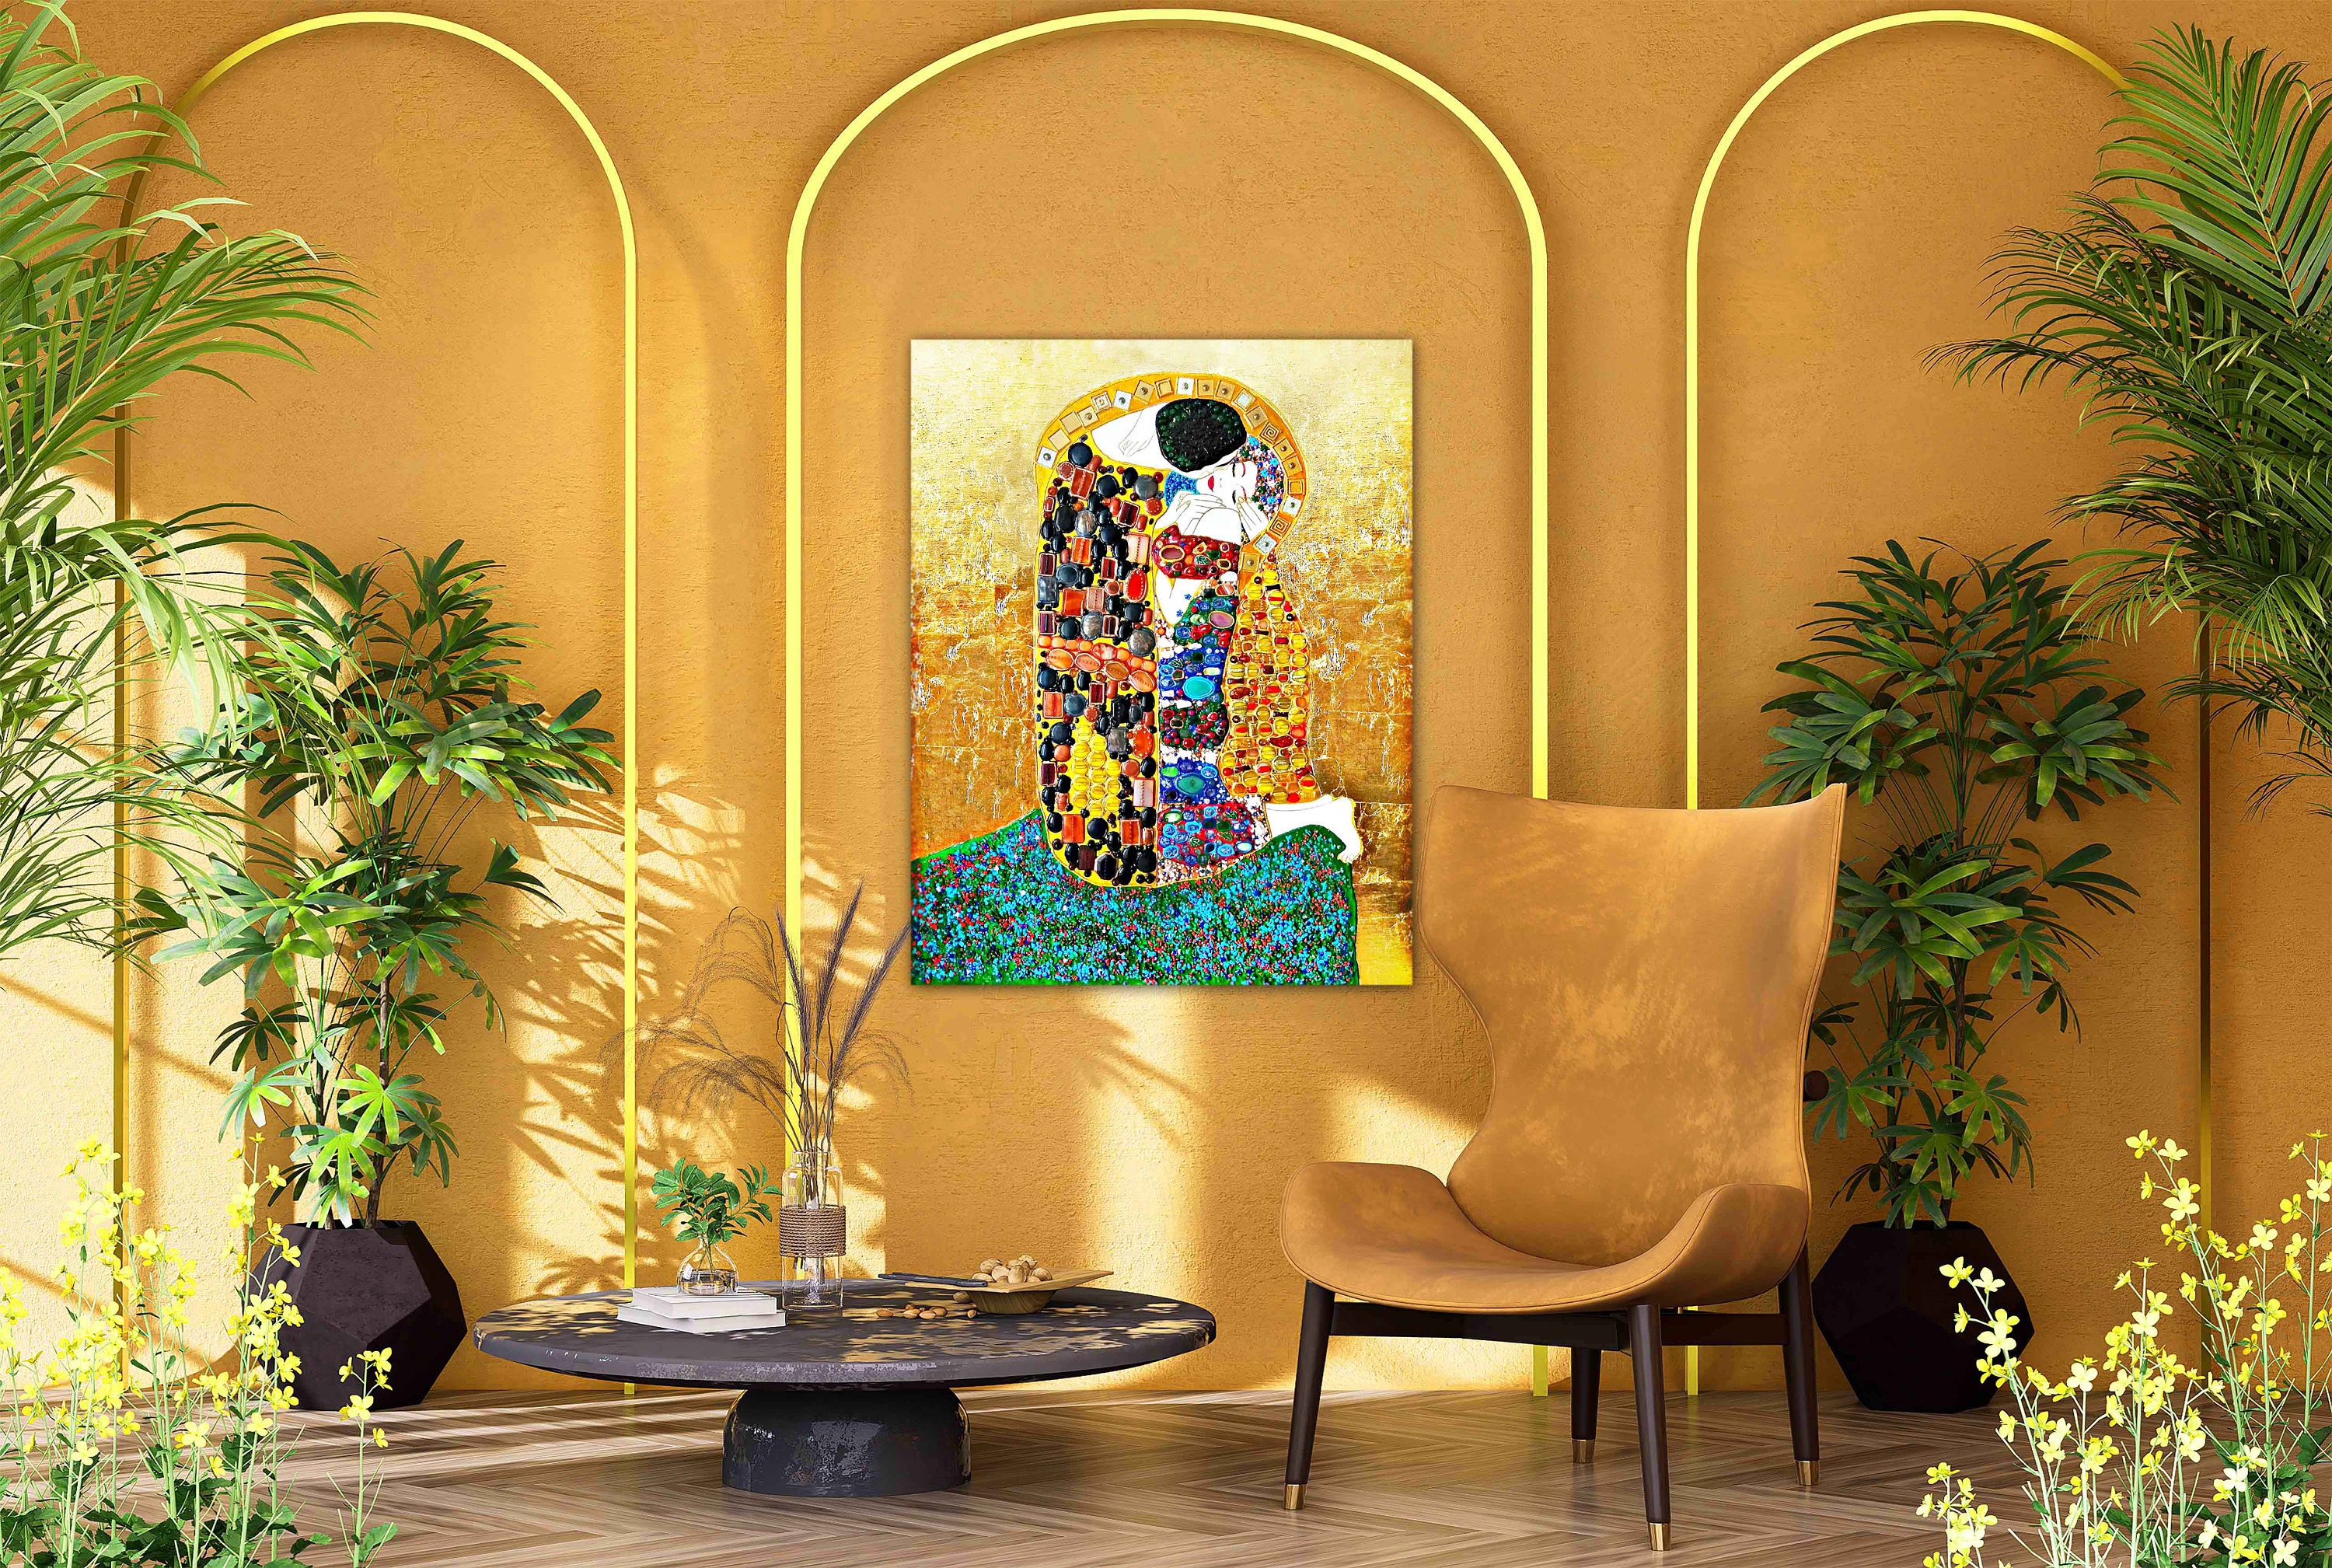 Kiss at starry night - pop art painting on large canvas, kissing couple,  inspired by Gustave Klimt Golden kiss , Luis Vuitton Channel, wall art,  decor, gift Painting by Tatsiana Yelistratava